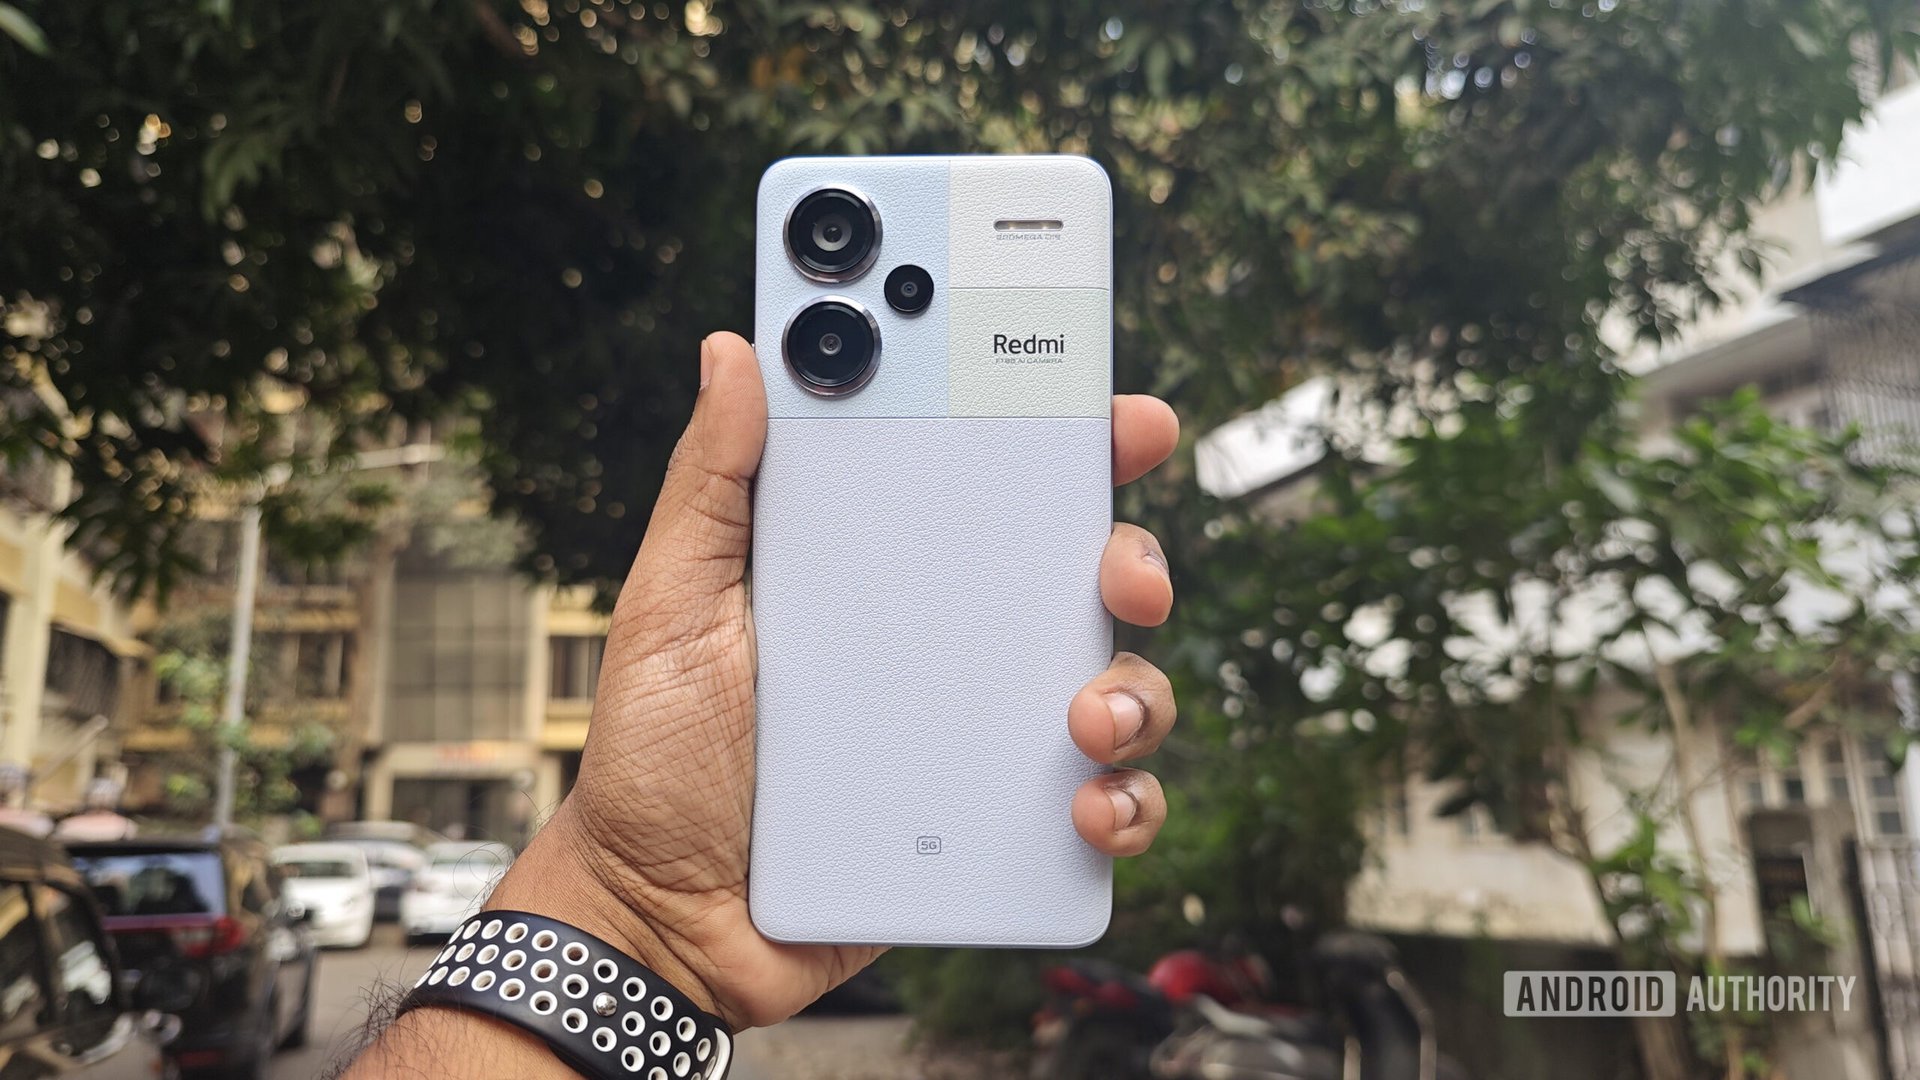 Redmi Note 13 Pro 5G review: Well-rounded mid-range phone